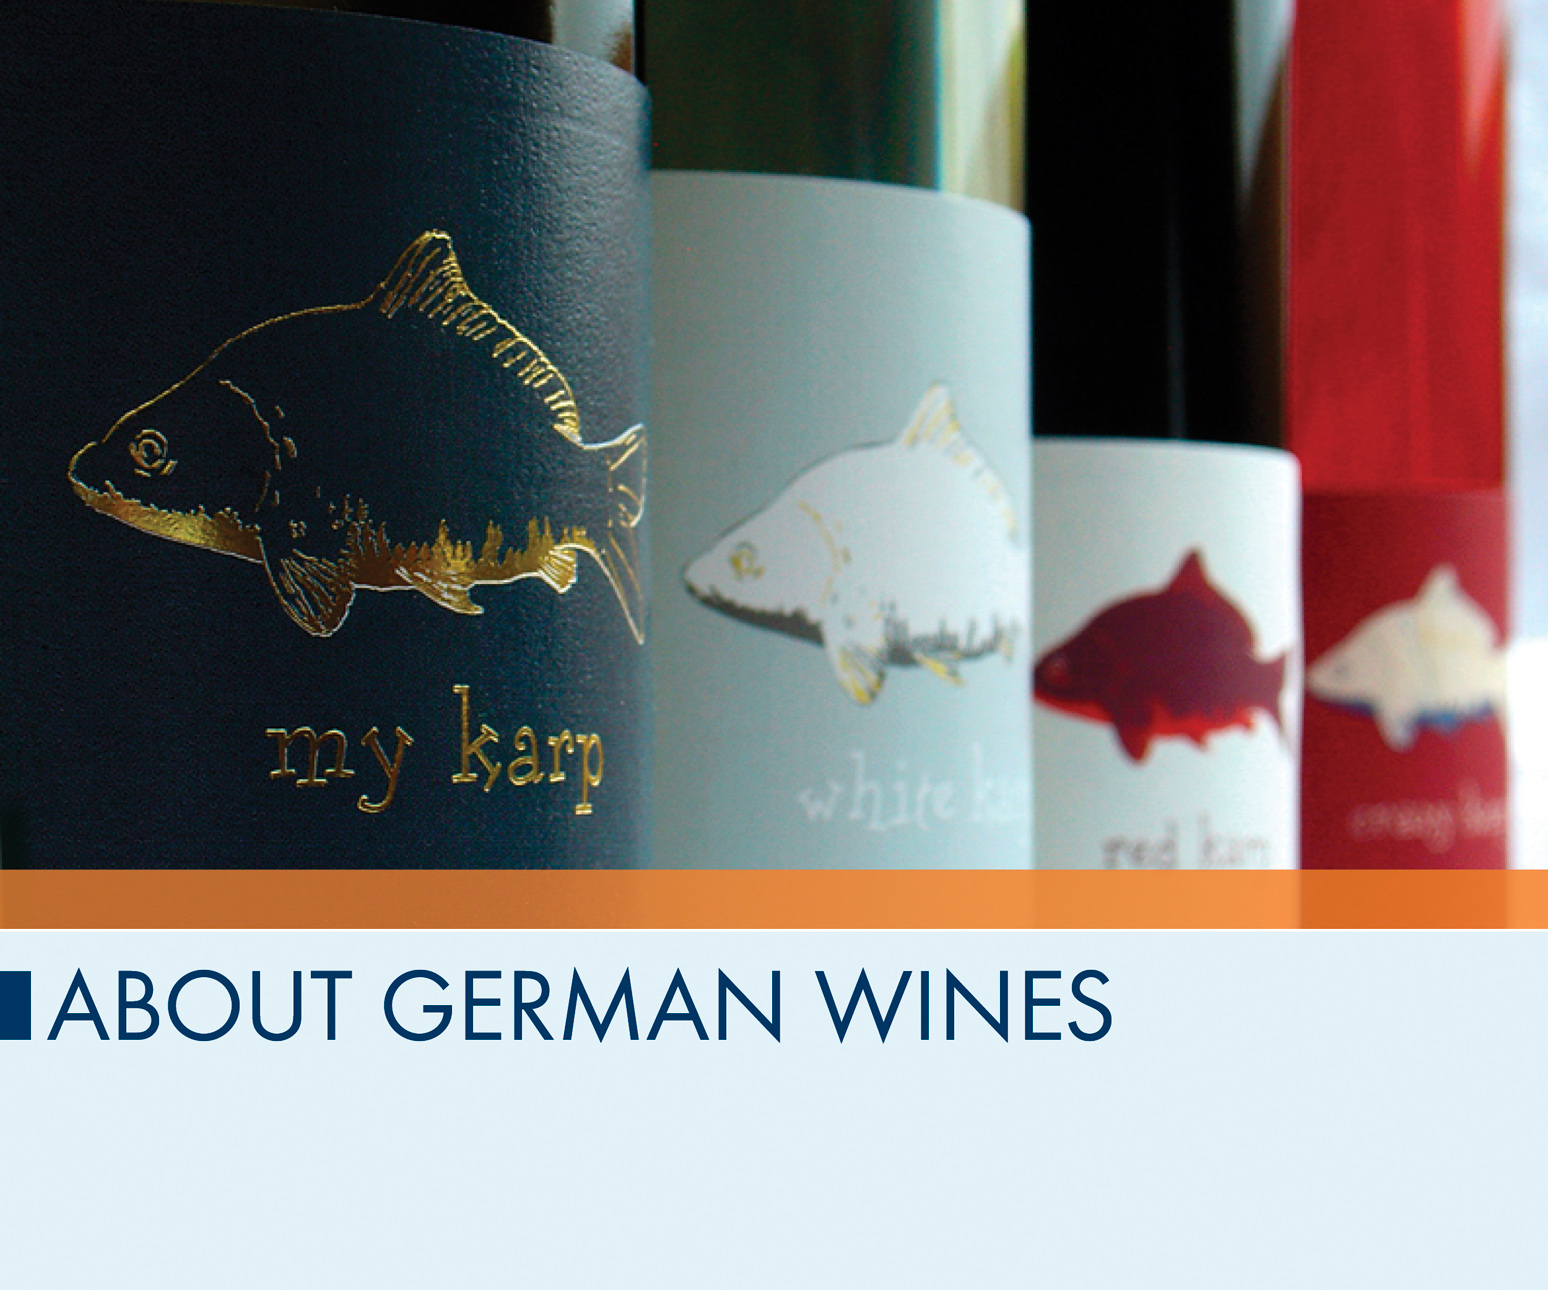 About German Wines